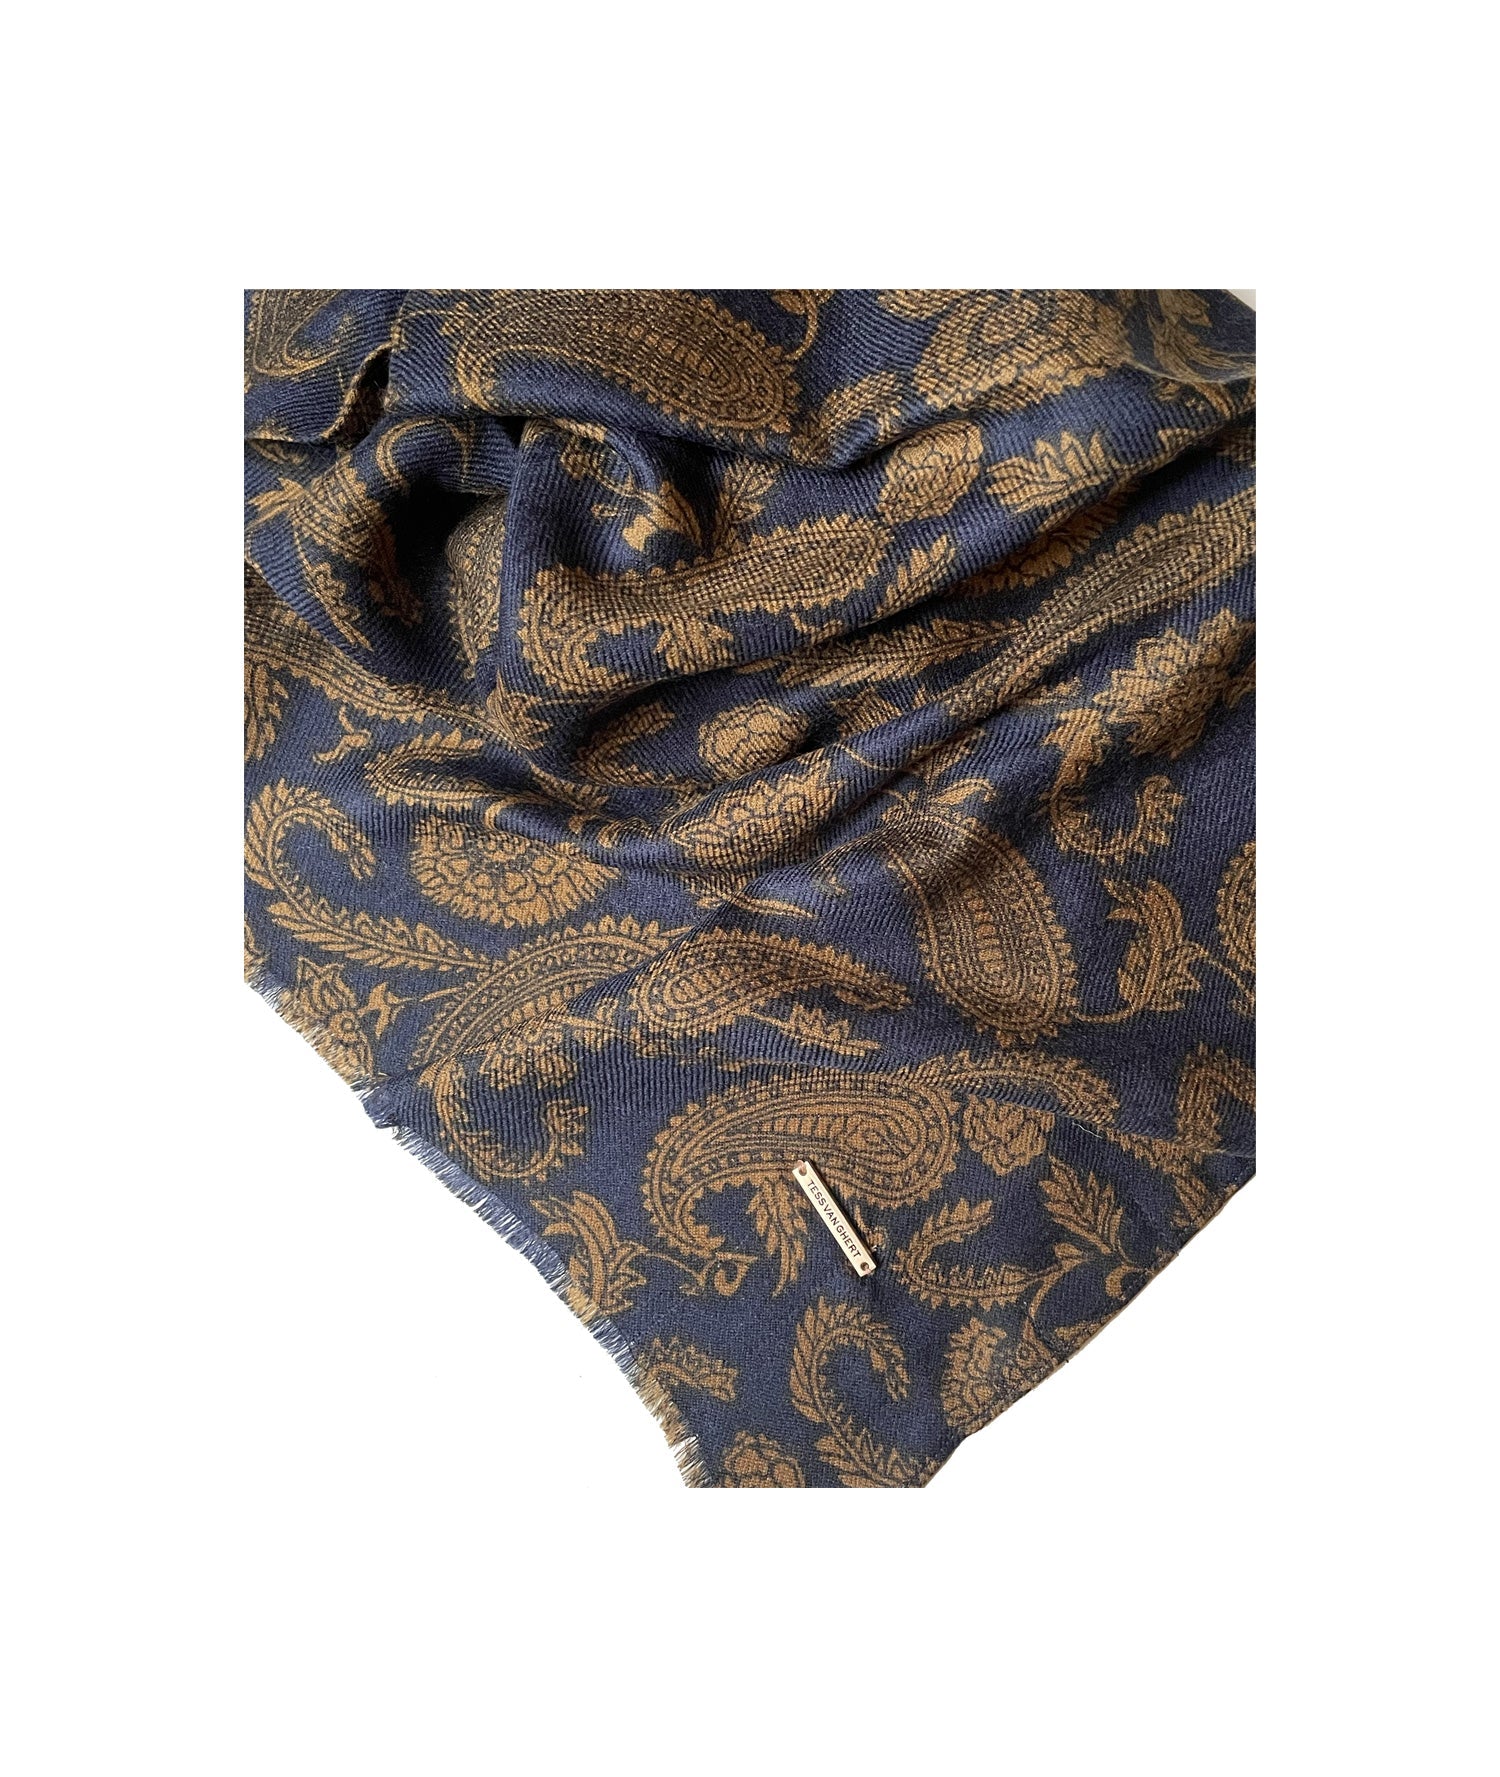 The Irreplaceable - Paisley pattern silk and cashmere scarf - Tess Van Ghert